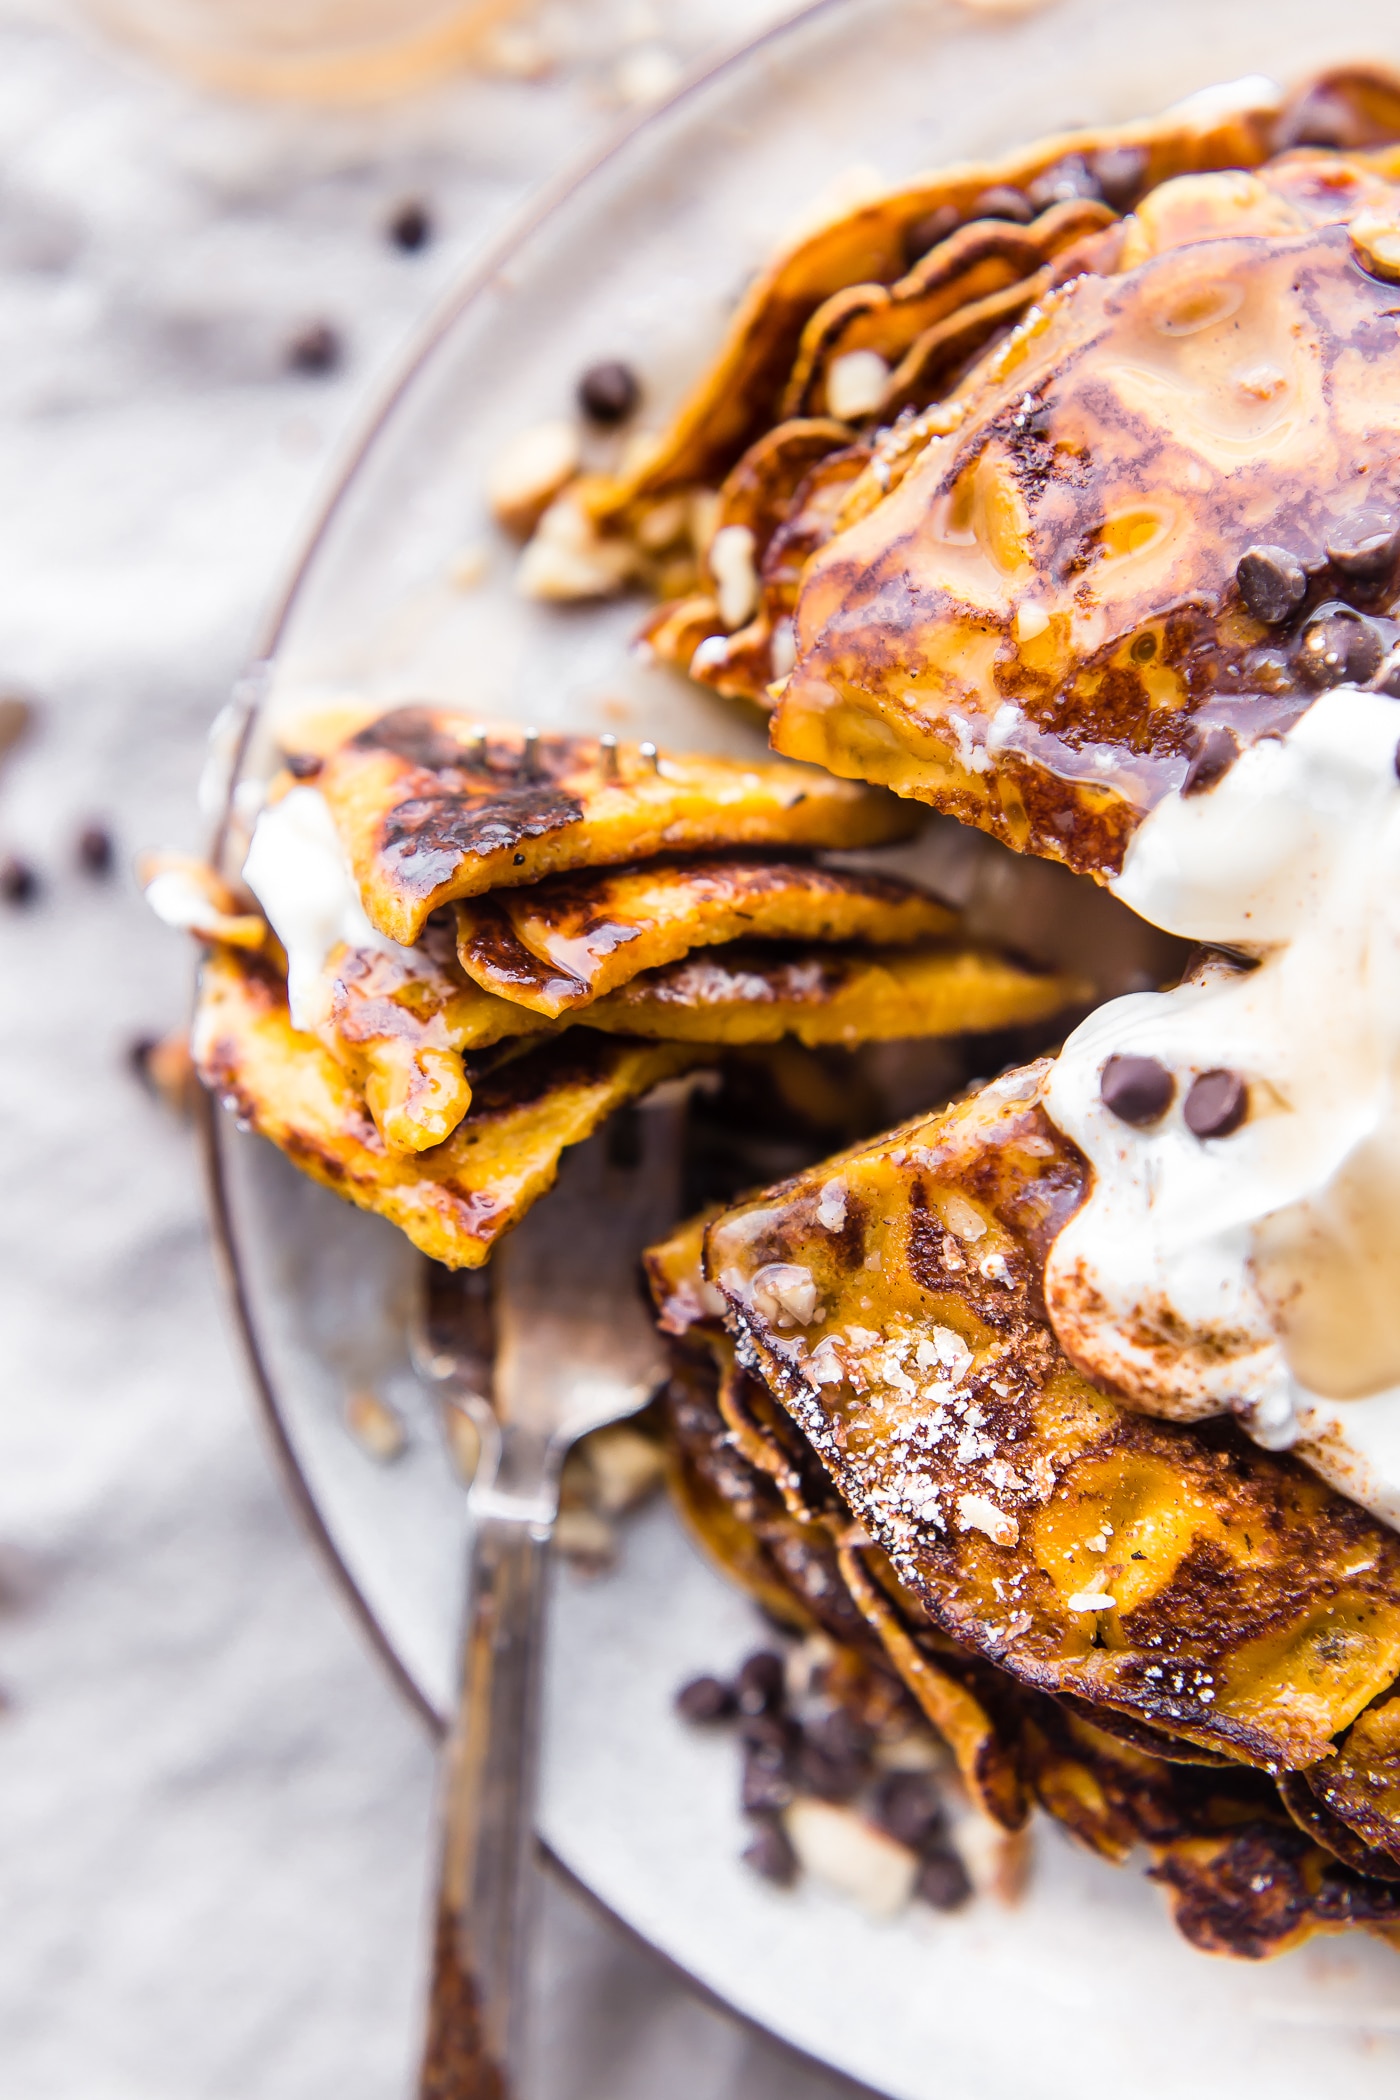 Flourless Carrot Cake Yogurt Pancakes - perfect for breakfast or brunch. Made with siggi’s vanilla yogurt, making them lower in sugar, gluten free, and protein packed! An easy blender pancakes recipe.